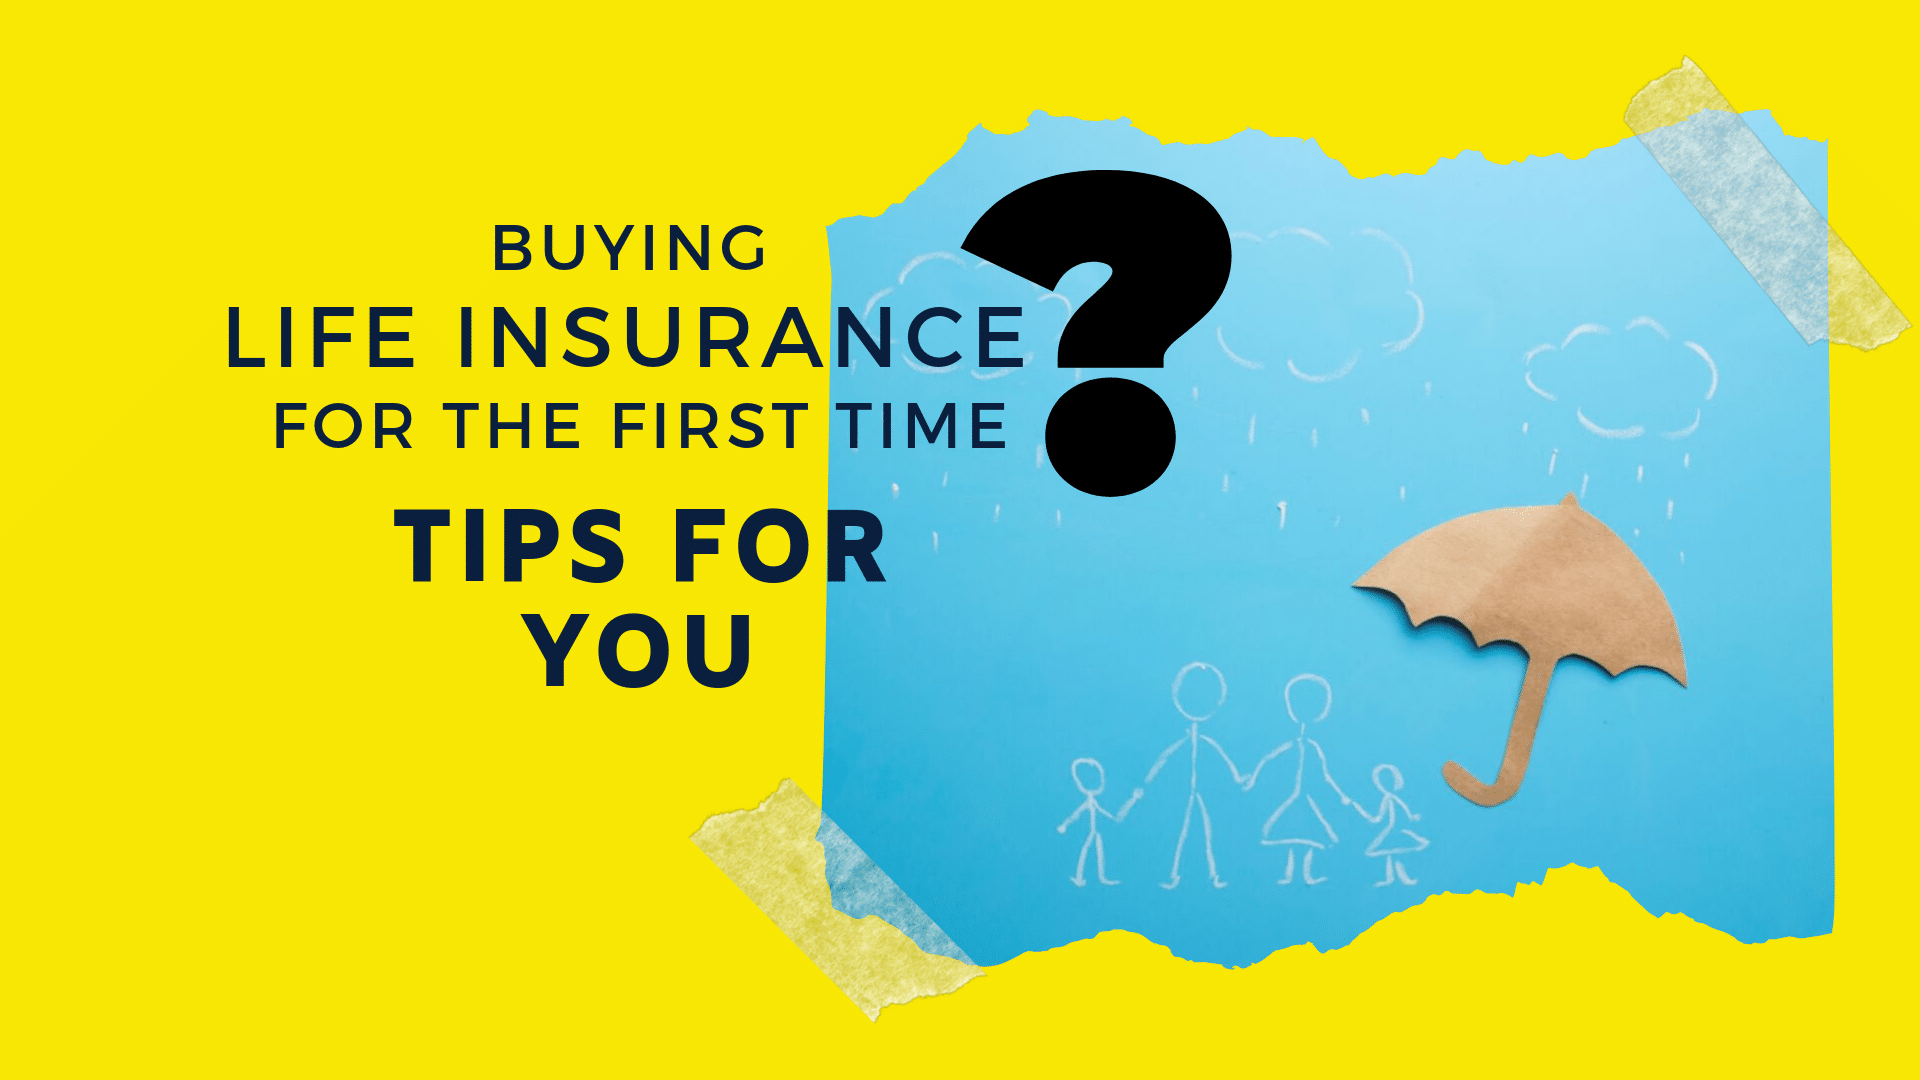 Know these tips while buying life insurance